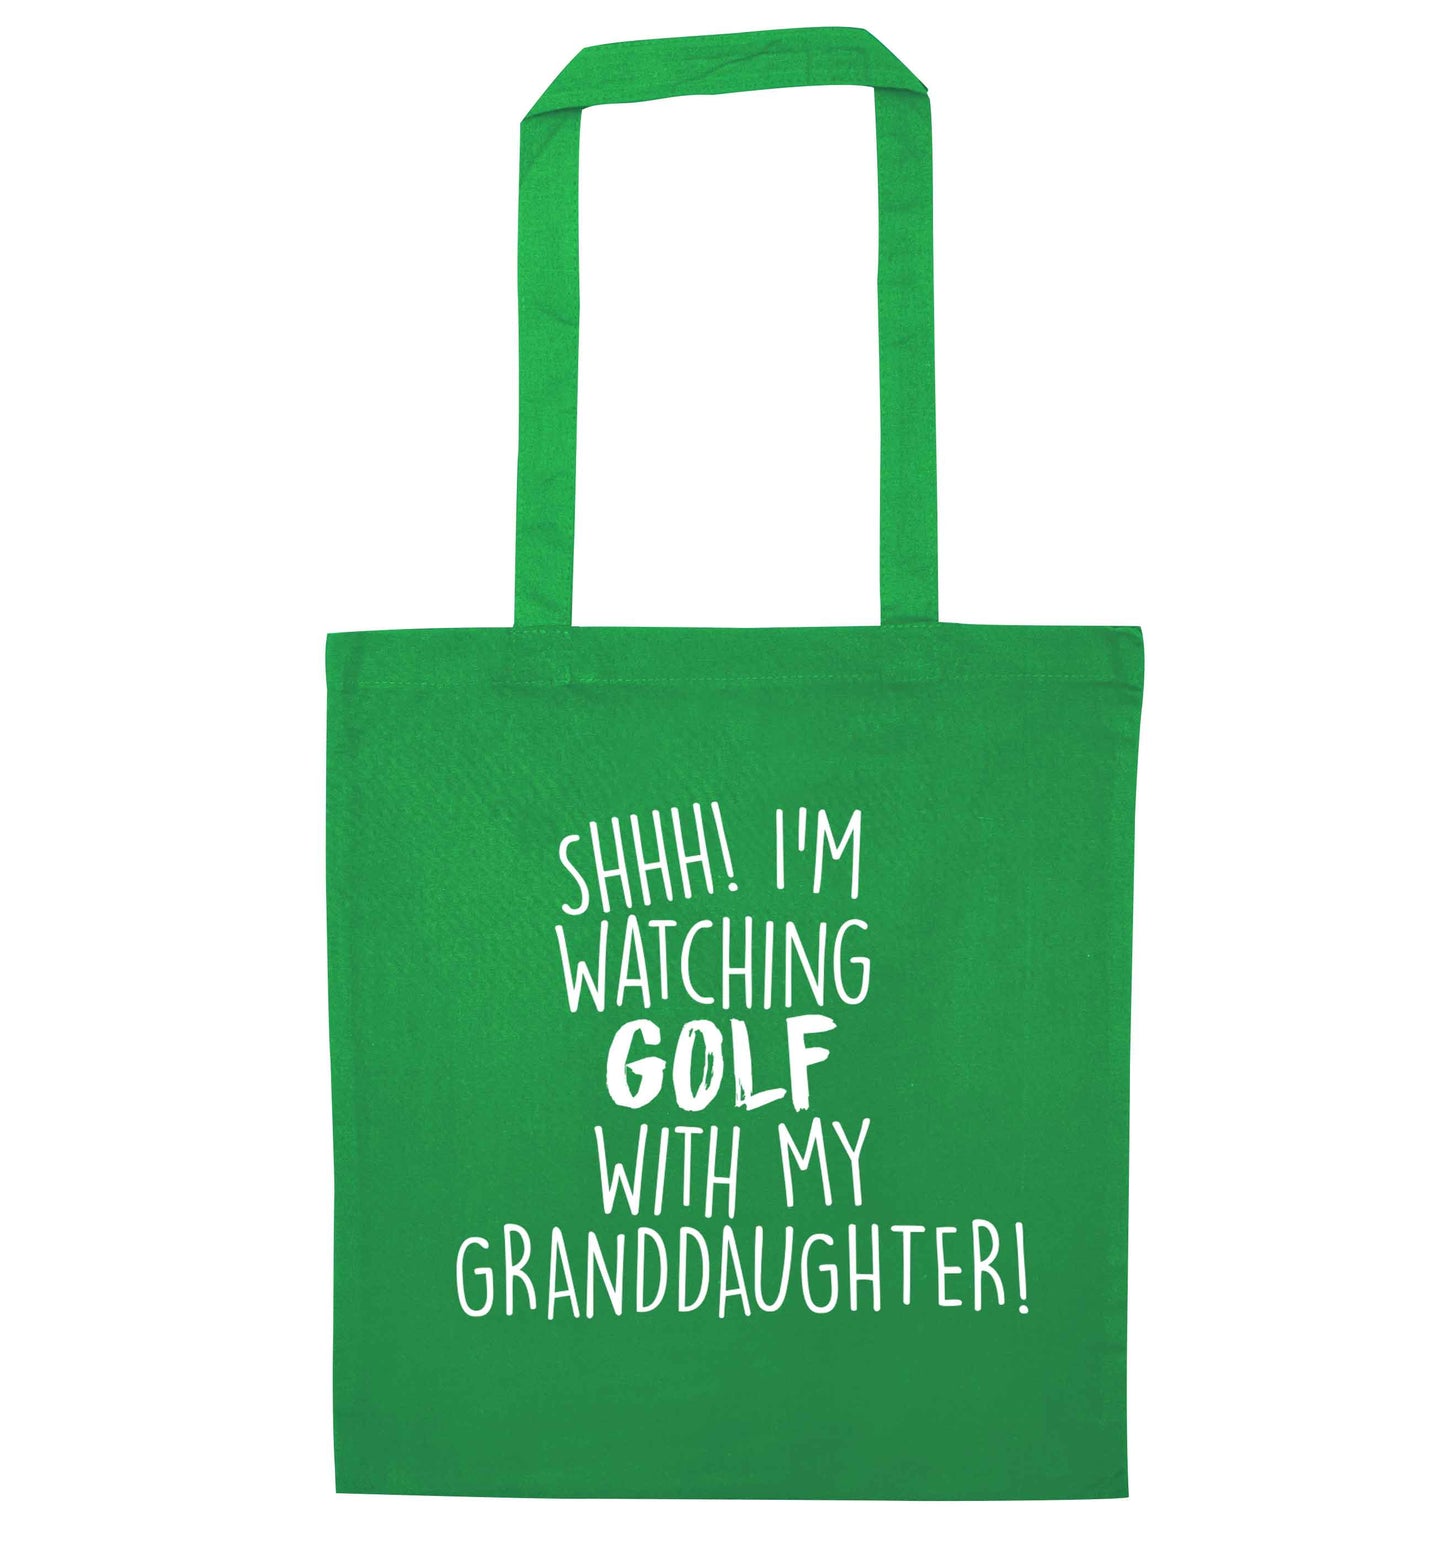 Shh I'm watching golf with my granddaughter green tote bag